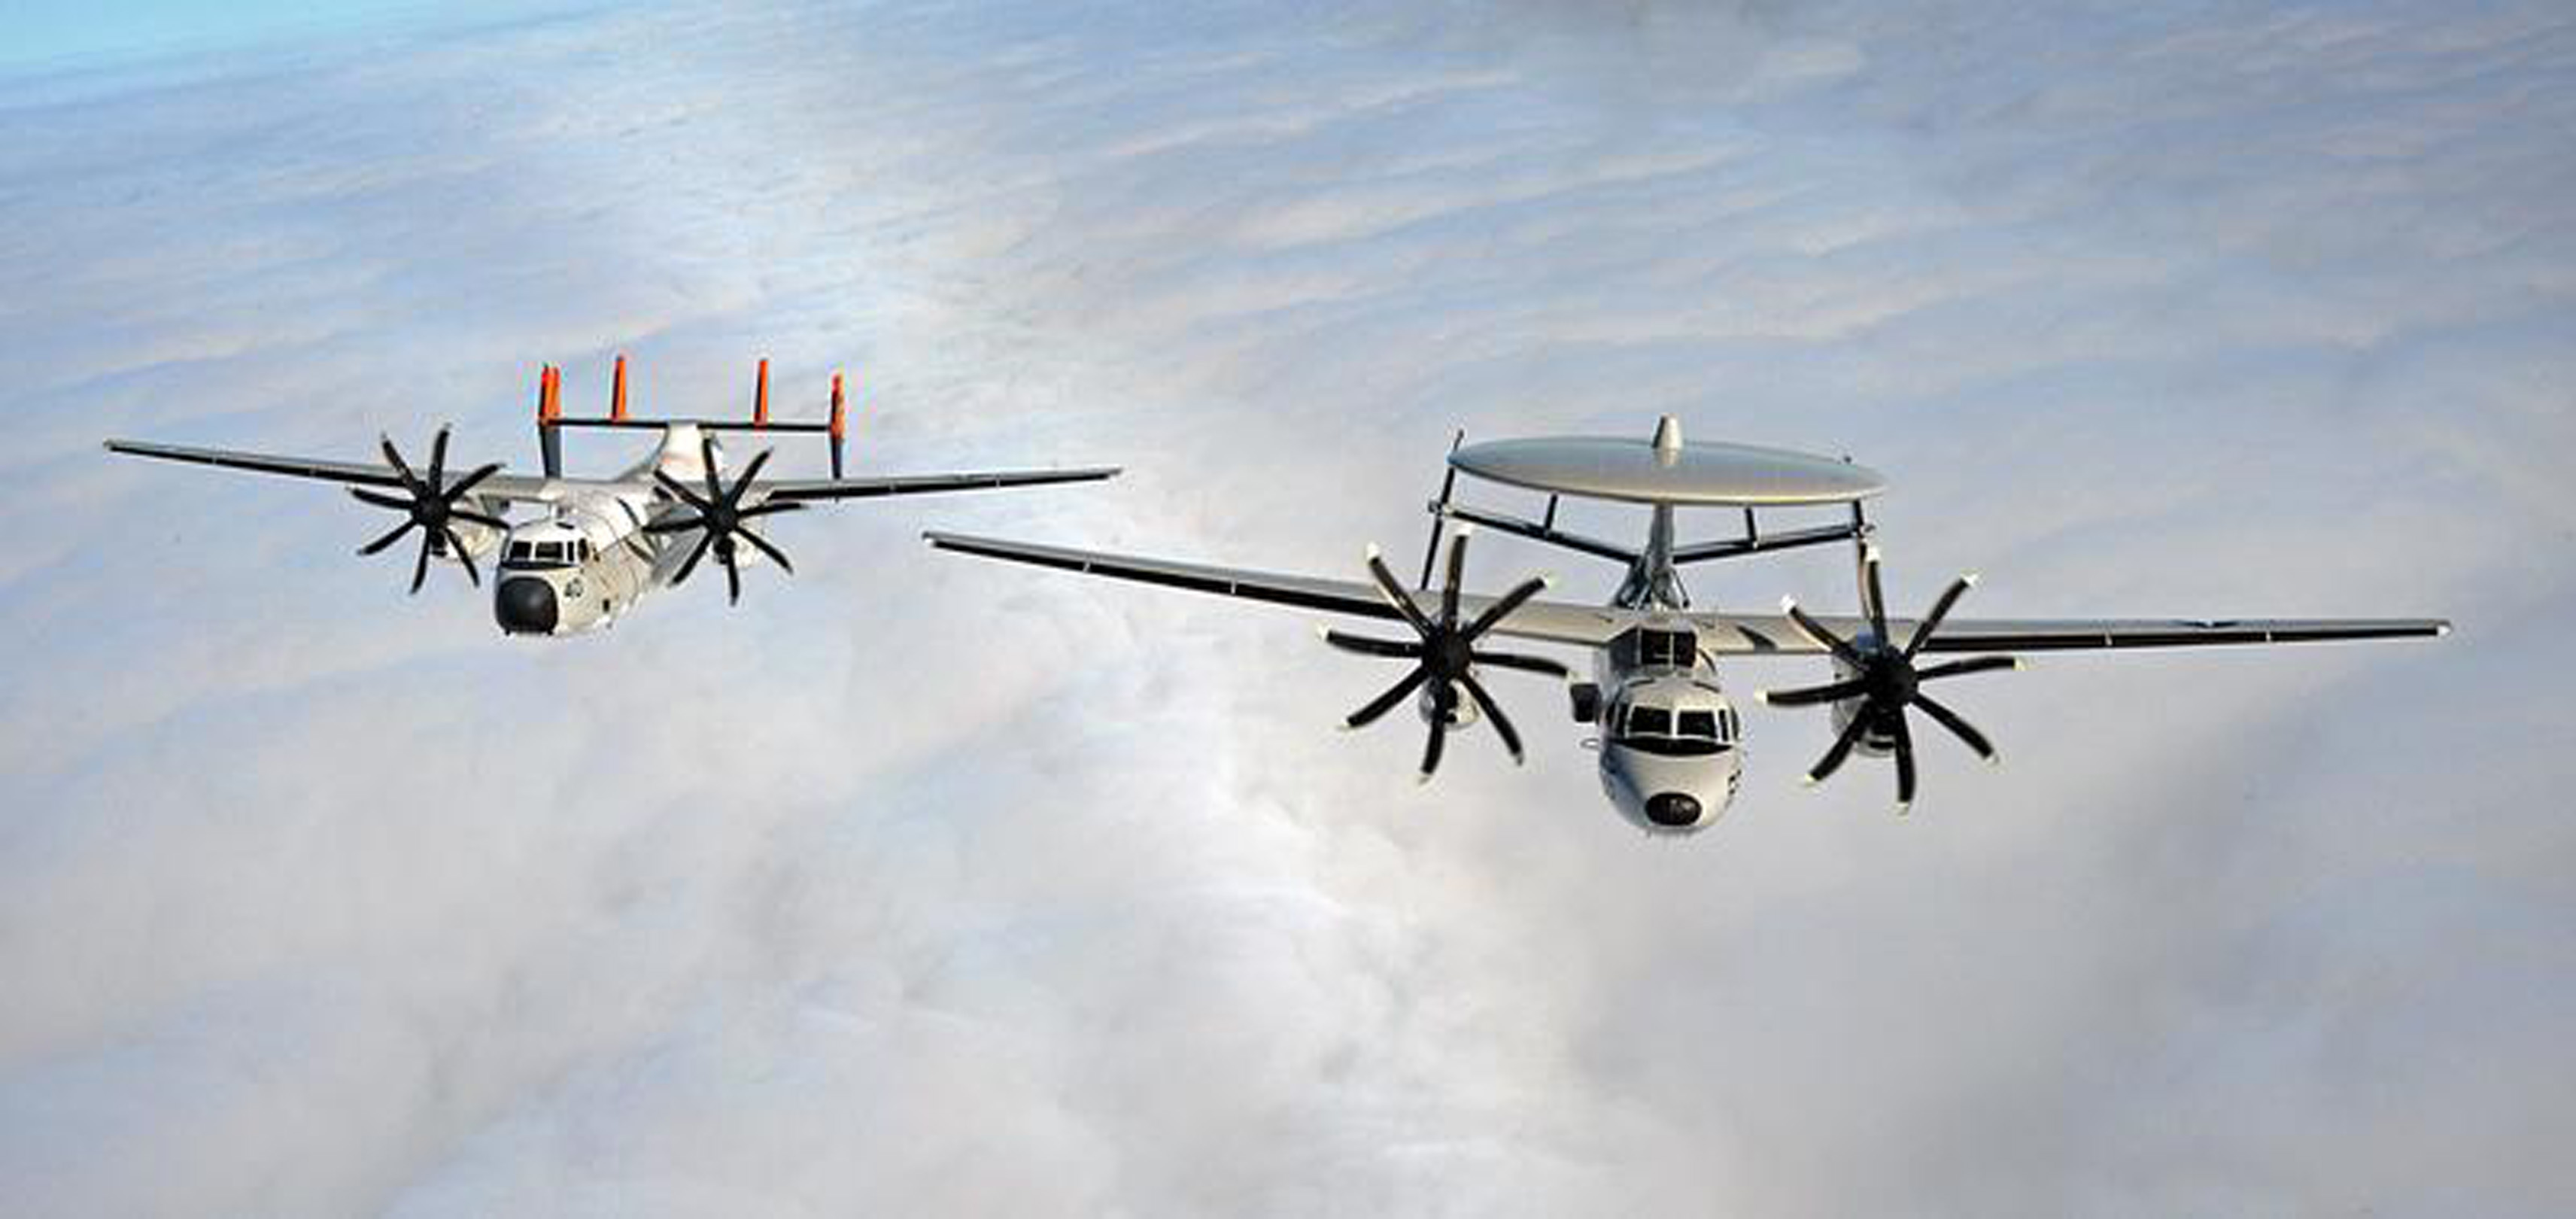 Shown left to right are a C-2A Greyhound and an E-2C Hawkeye.